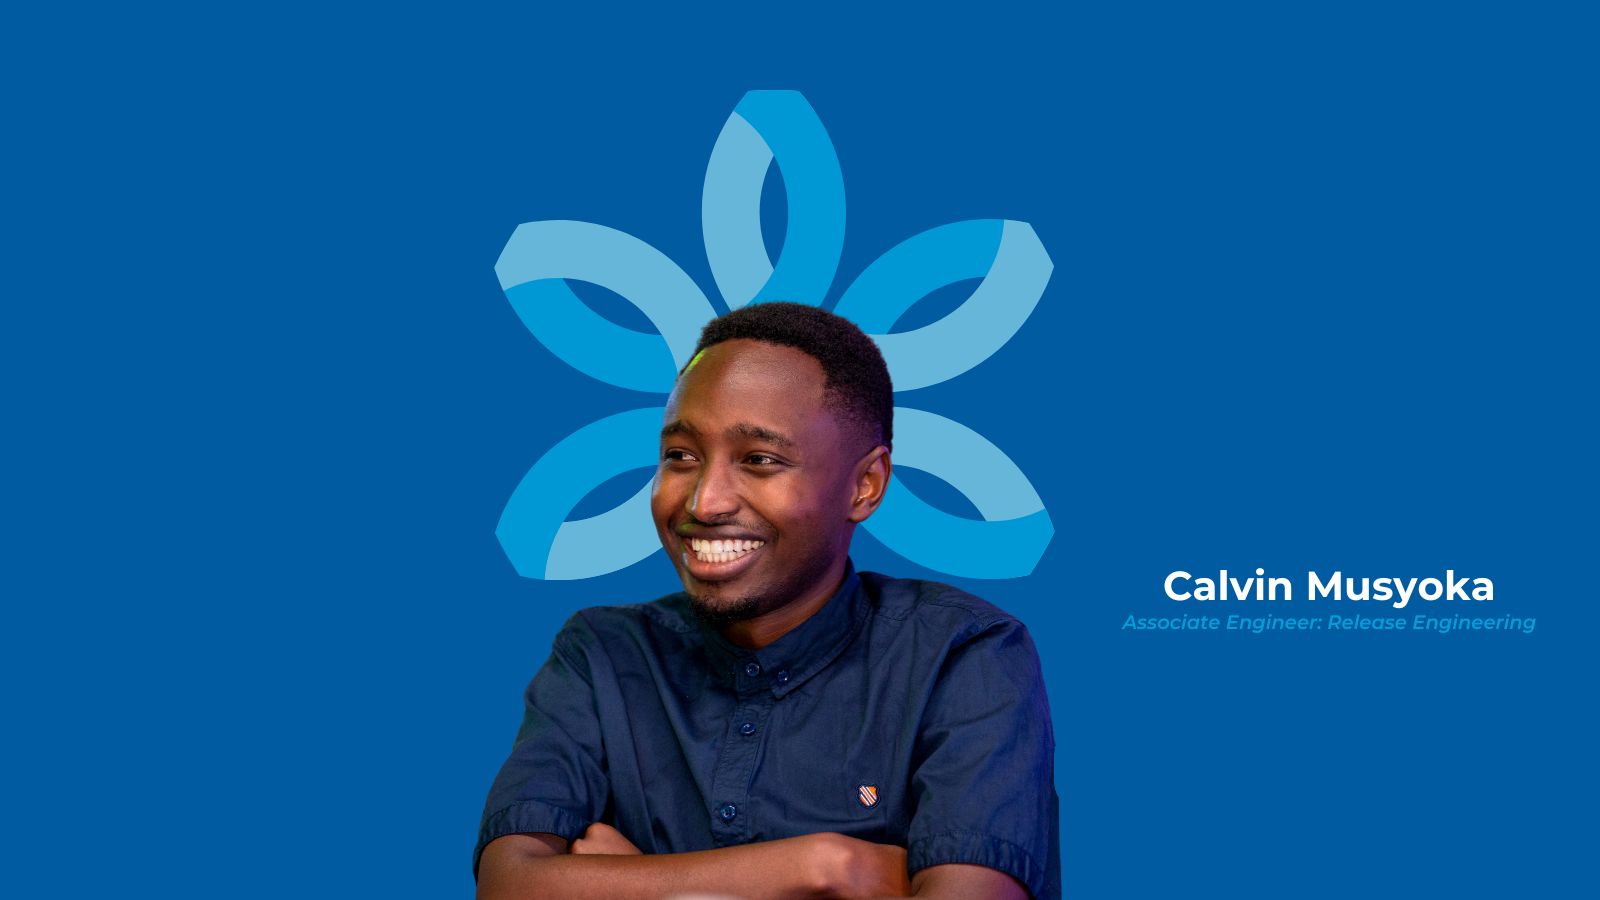 From IT Helpdesk Engineer to Associate Engineer: The Inspiring Career Journey of Calvin Musyoka at Cellulant